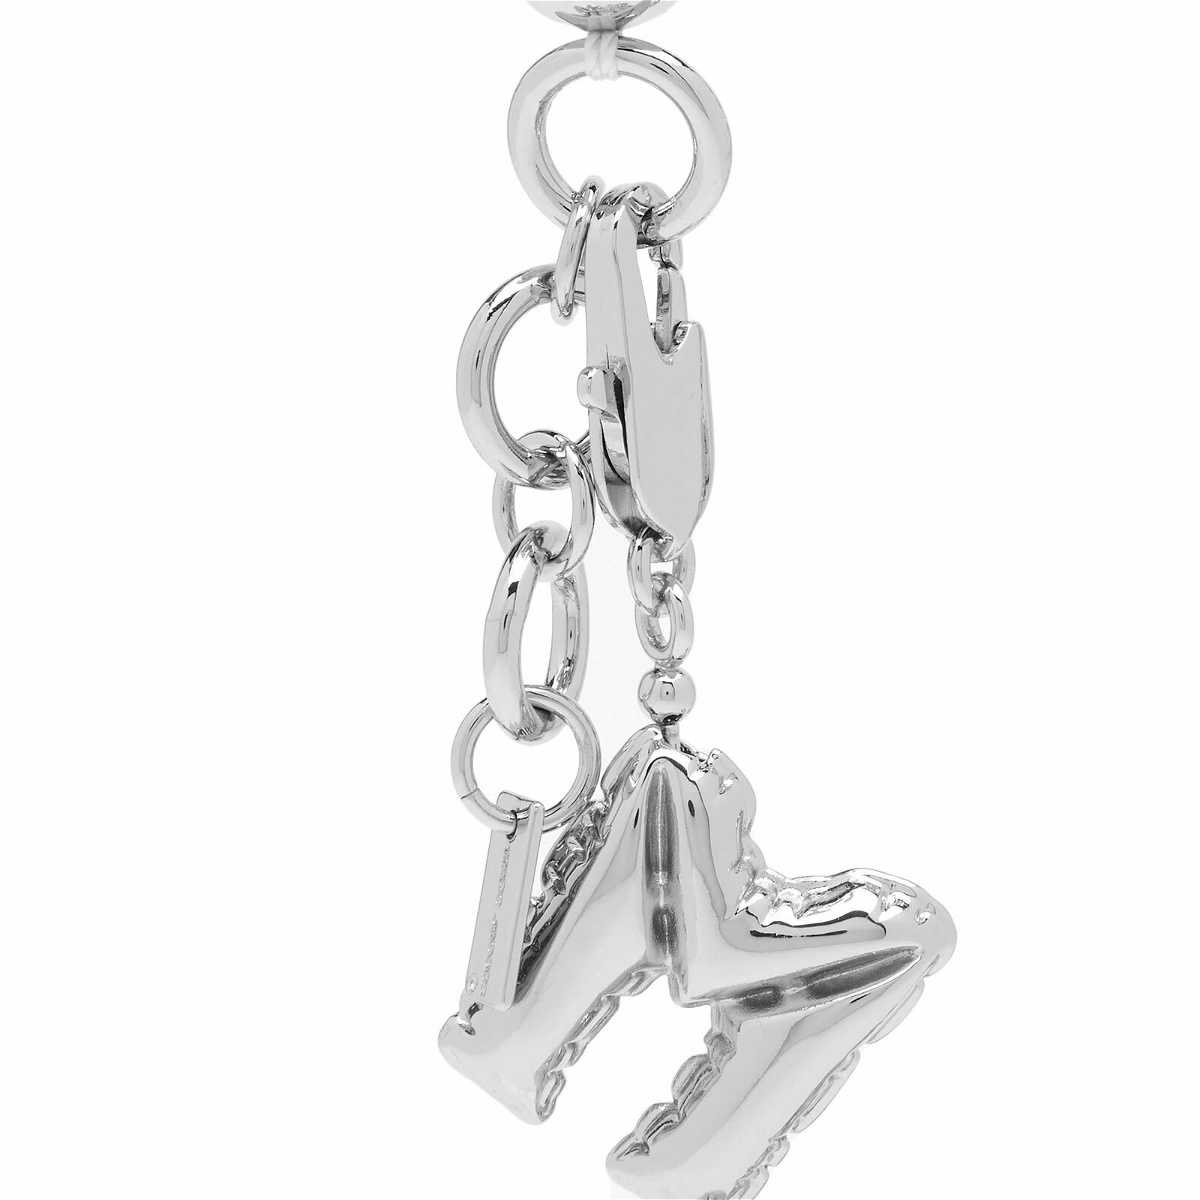 Marc Jacobs Jewelry Online Shop - Silver Womens The Monogram Chain